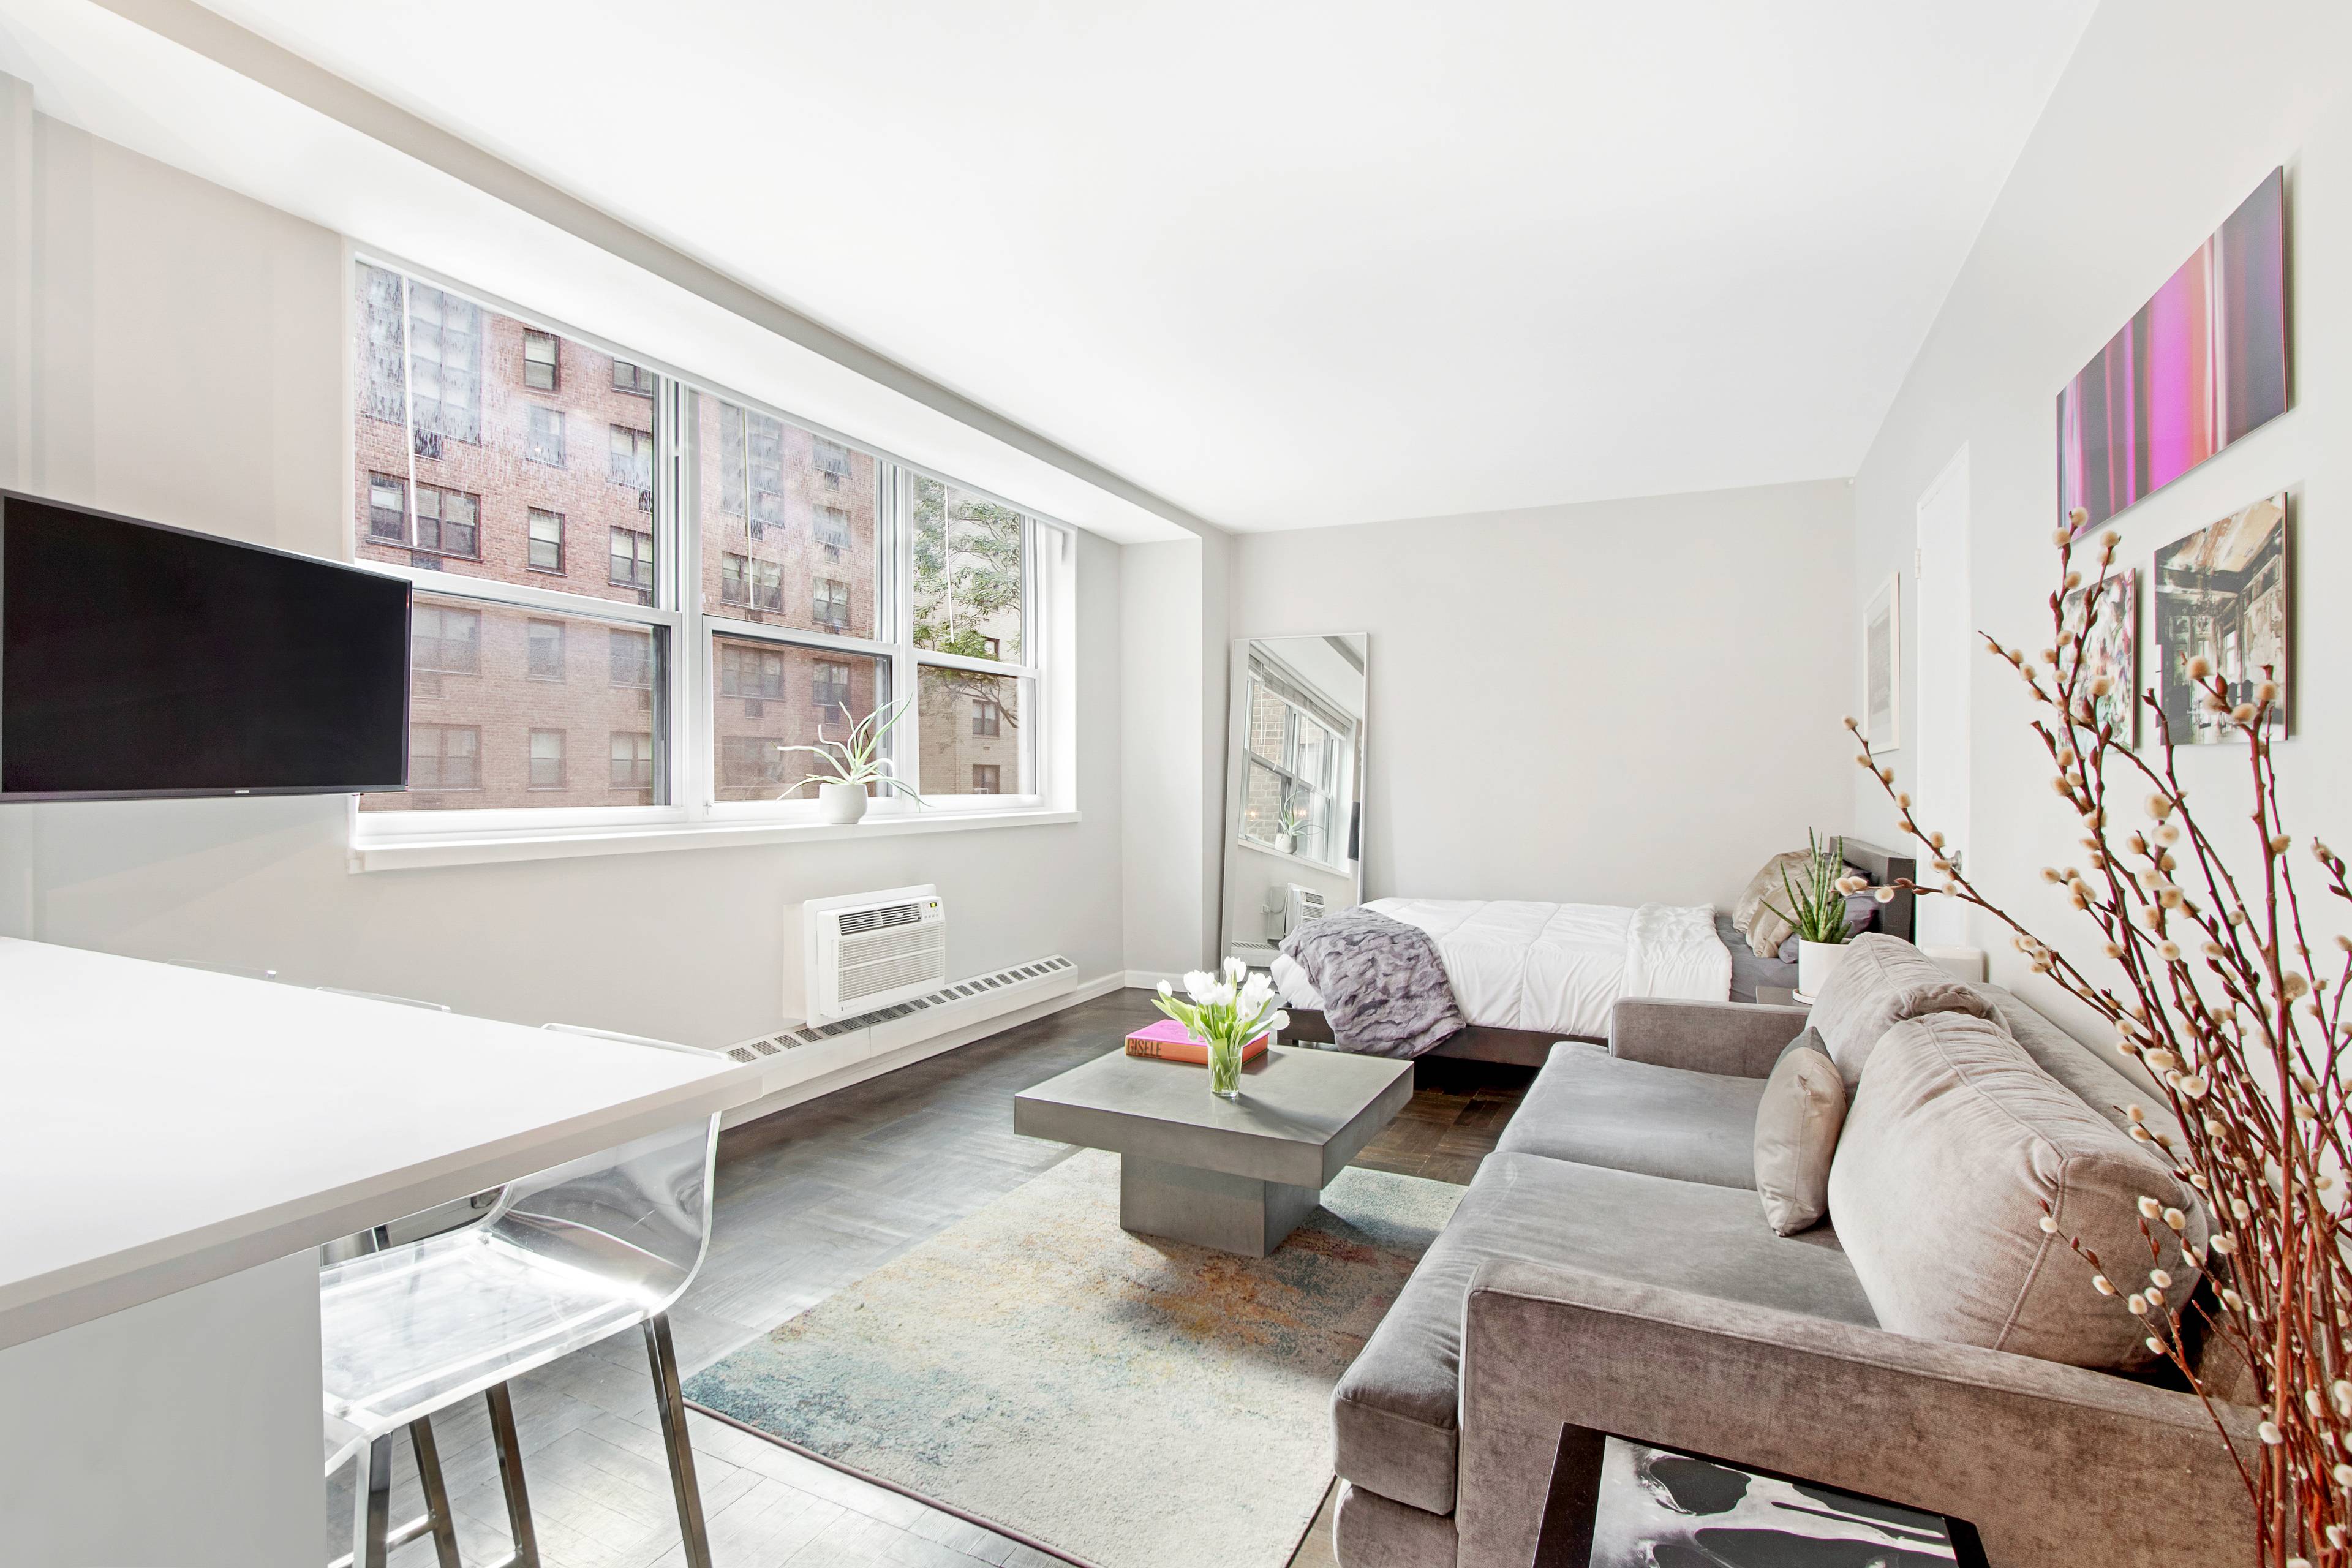 BEAUTIFULLY RENOVATED STUDIO- FULLY FURNISHED  IN THE HEART OF GREENWICH VILLAGE